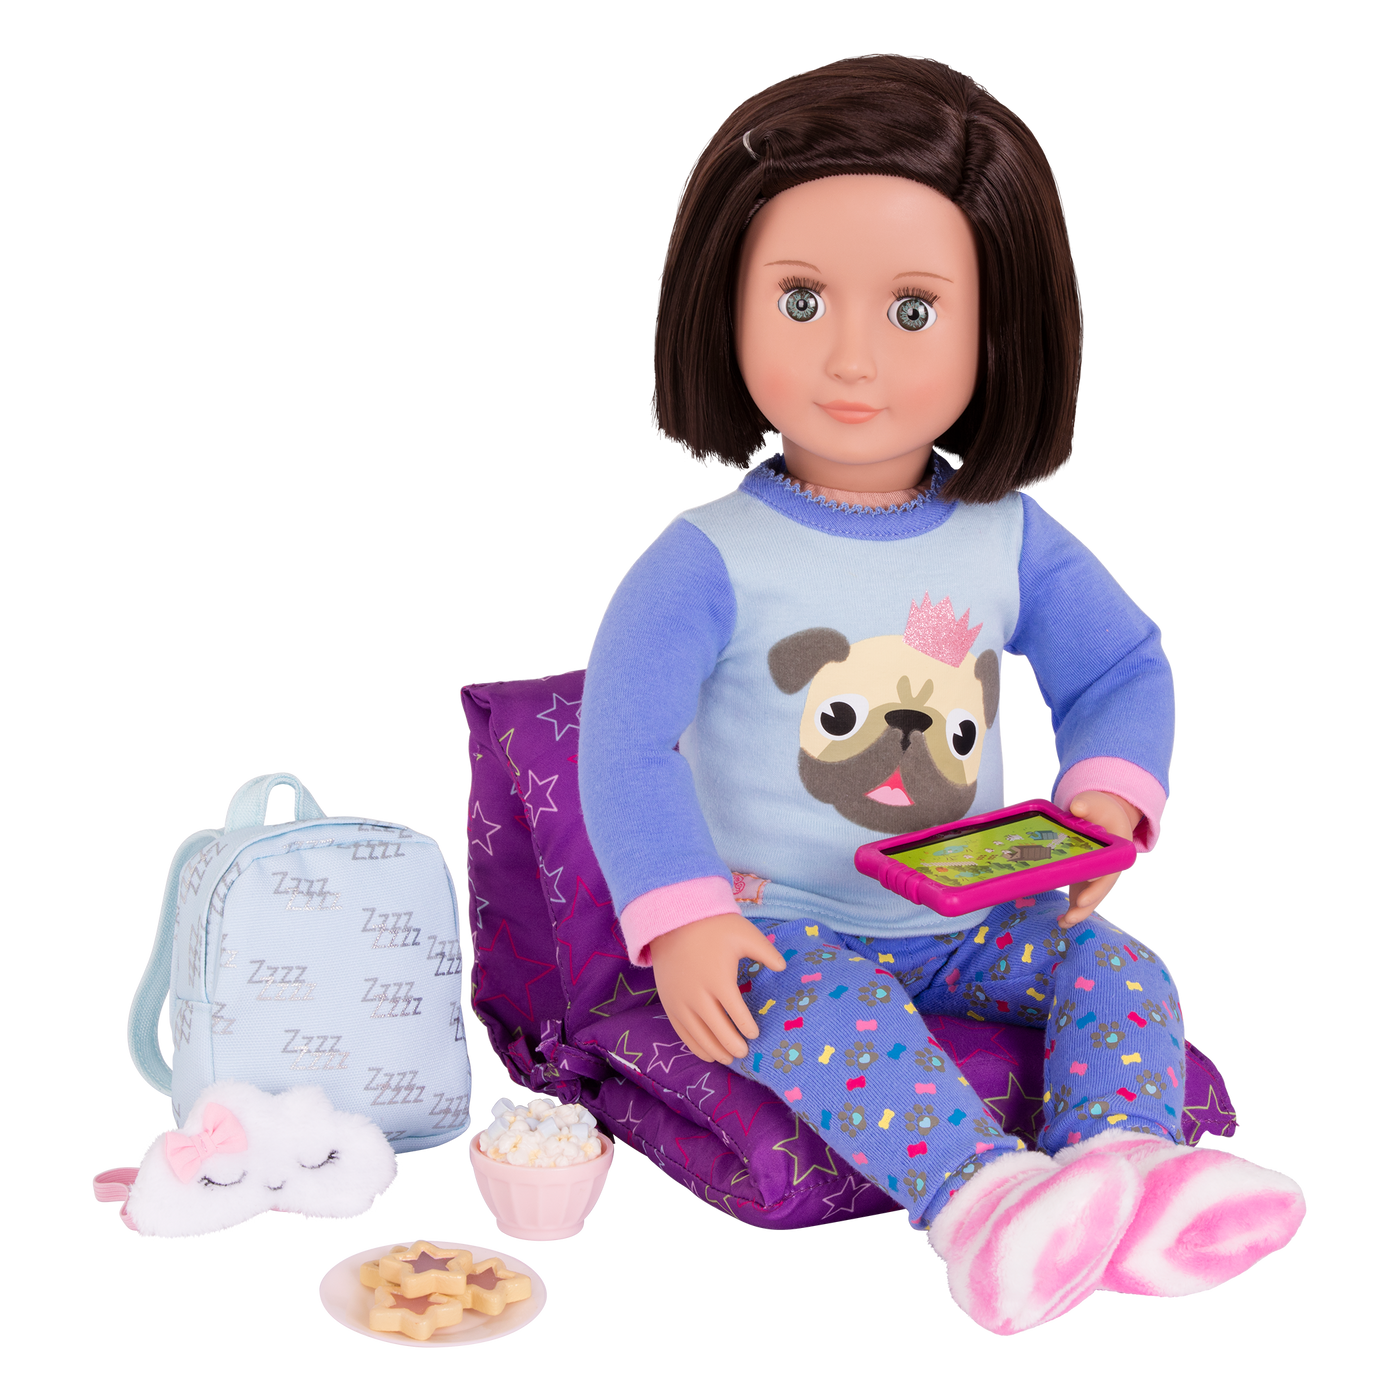 18-inch doll with sleepover playset